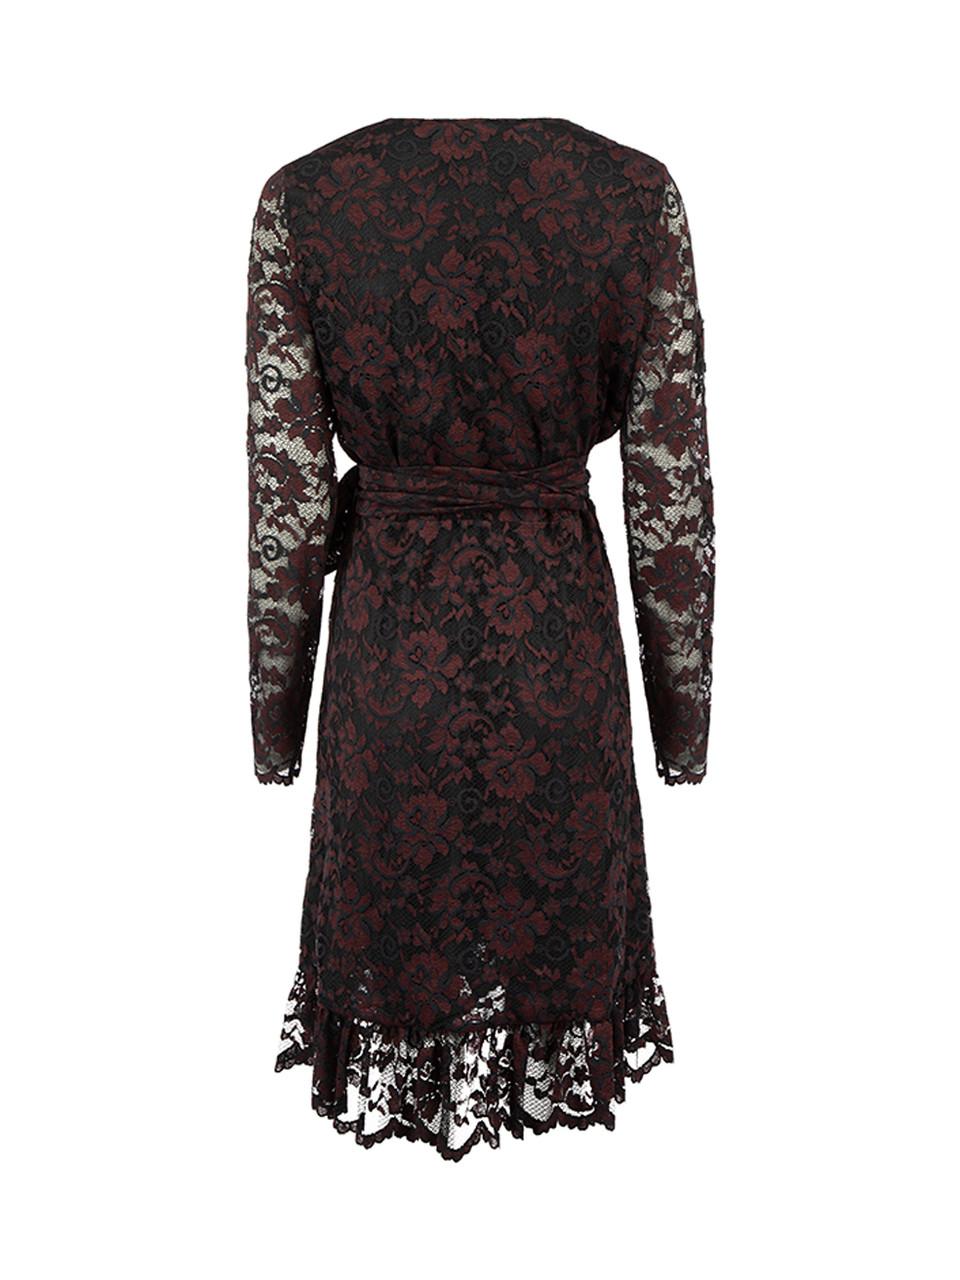 Burgundy Lace Wrap Mini Dress Size L In Good Condition For Sale In London, GB